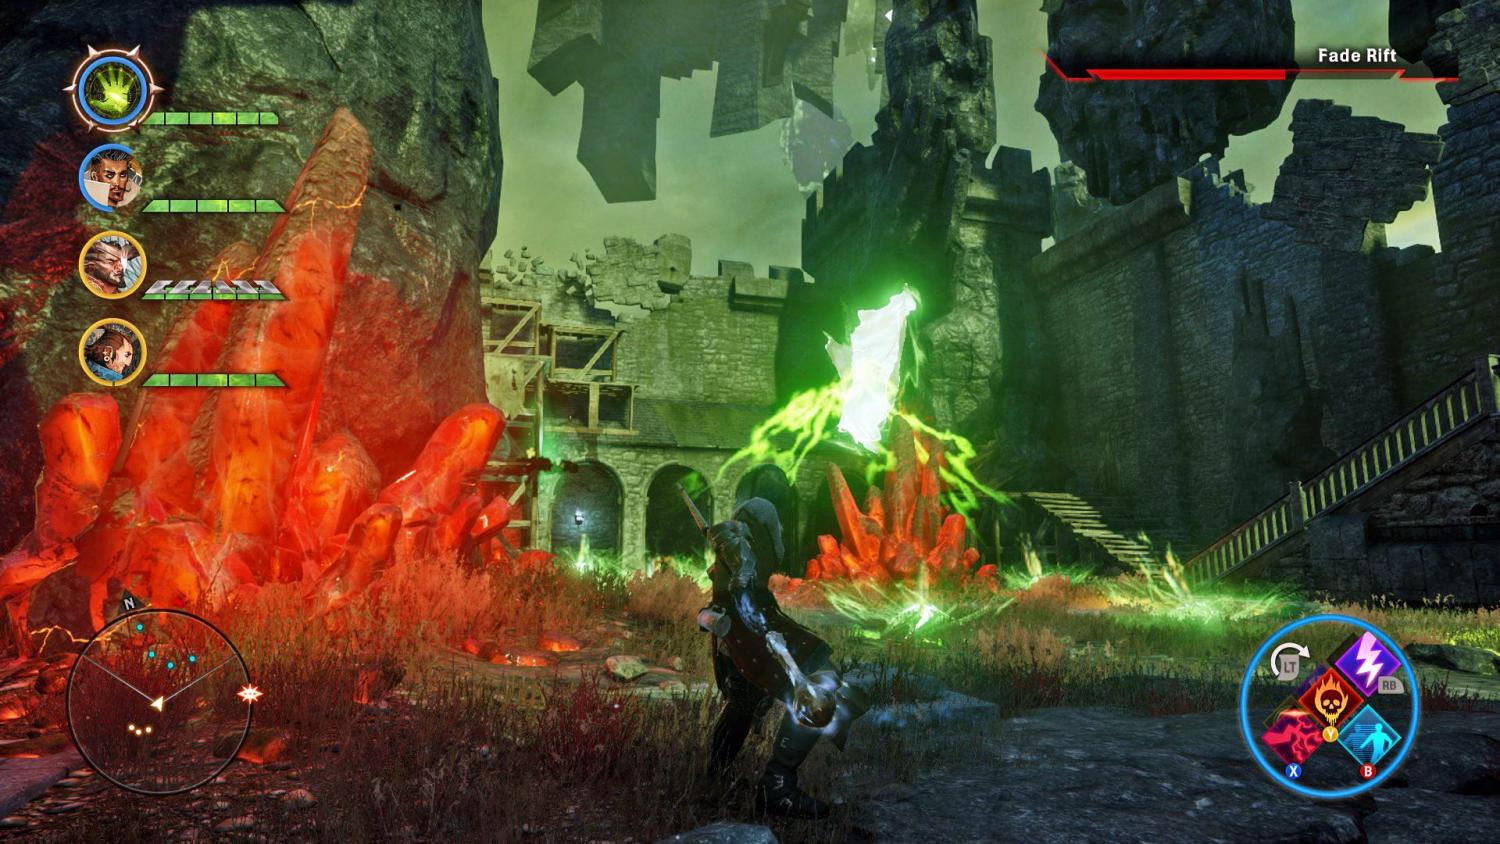 A primer about Thedas, the Dragon Age setting - Guide to the